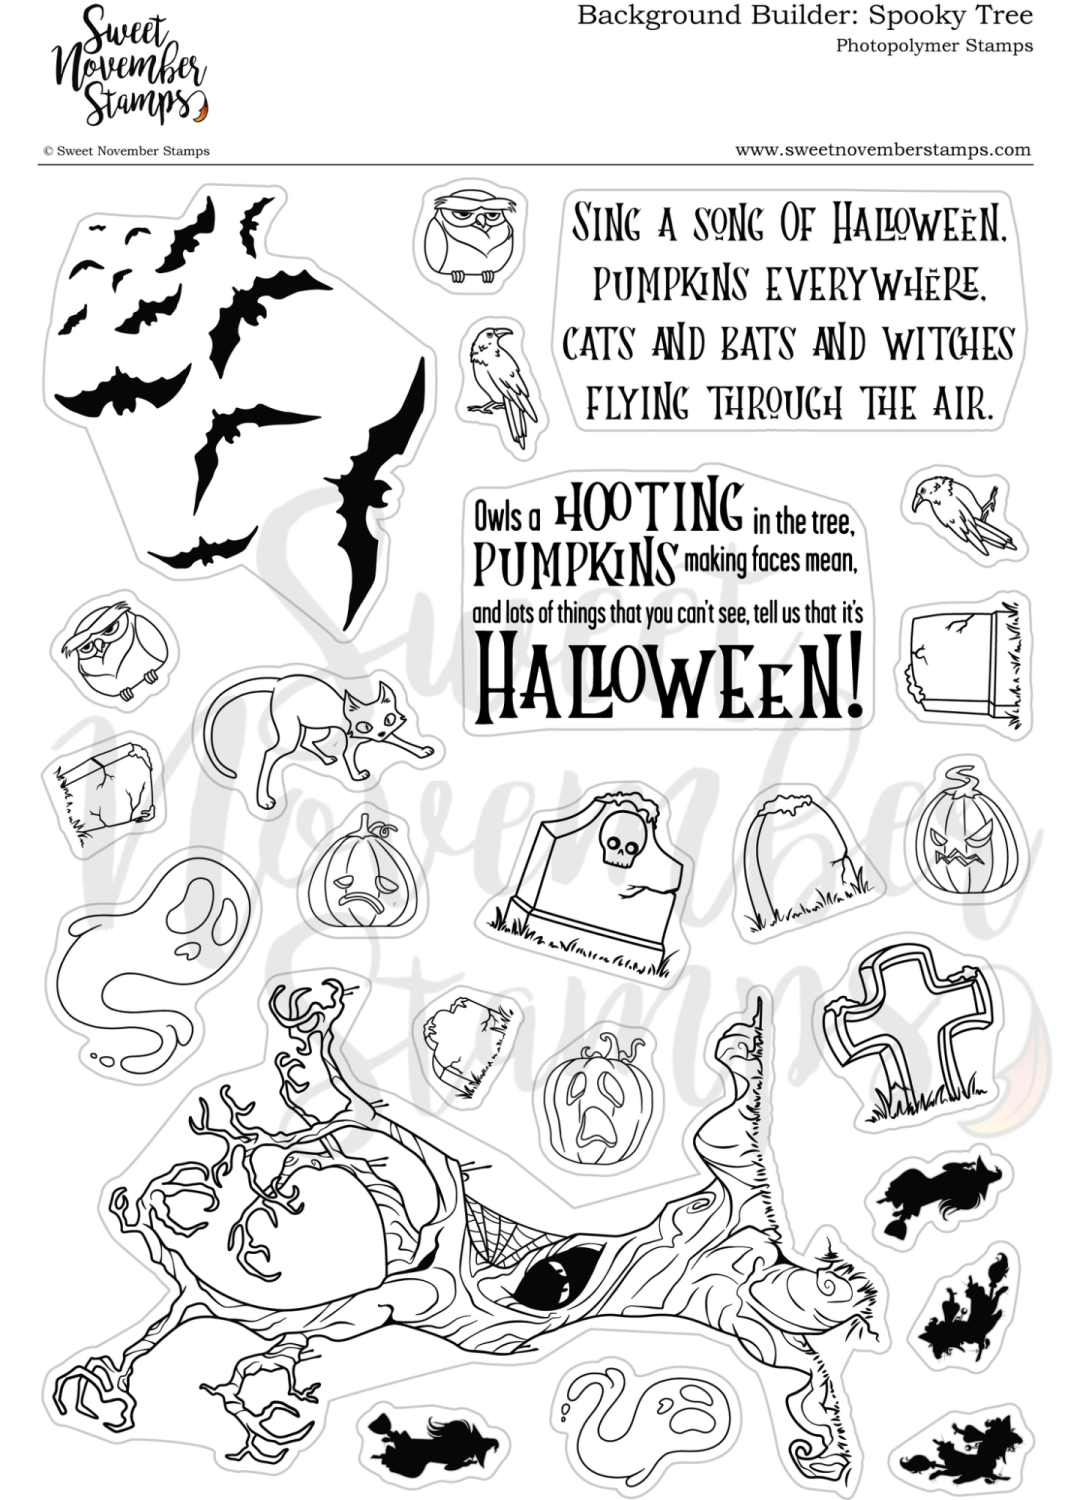 ****NEW**** Sweet November - Background Builder: Spooky Tree Clear stamp se